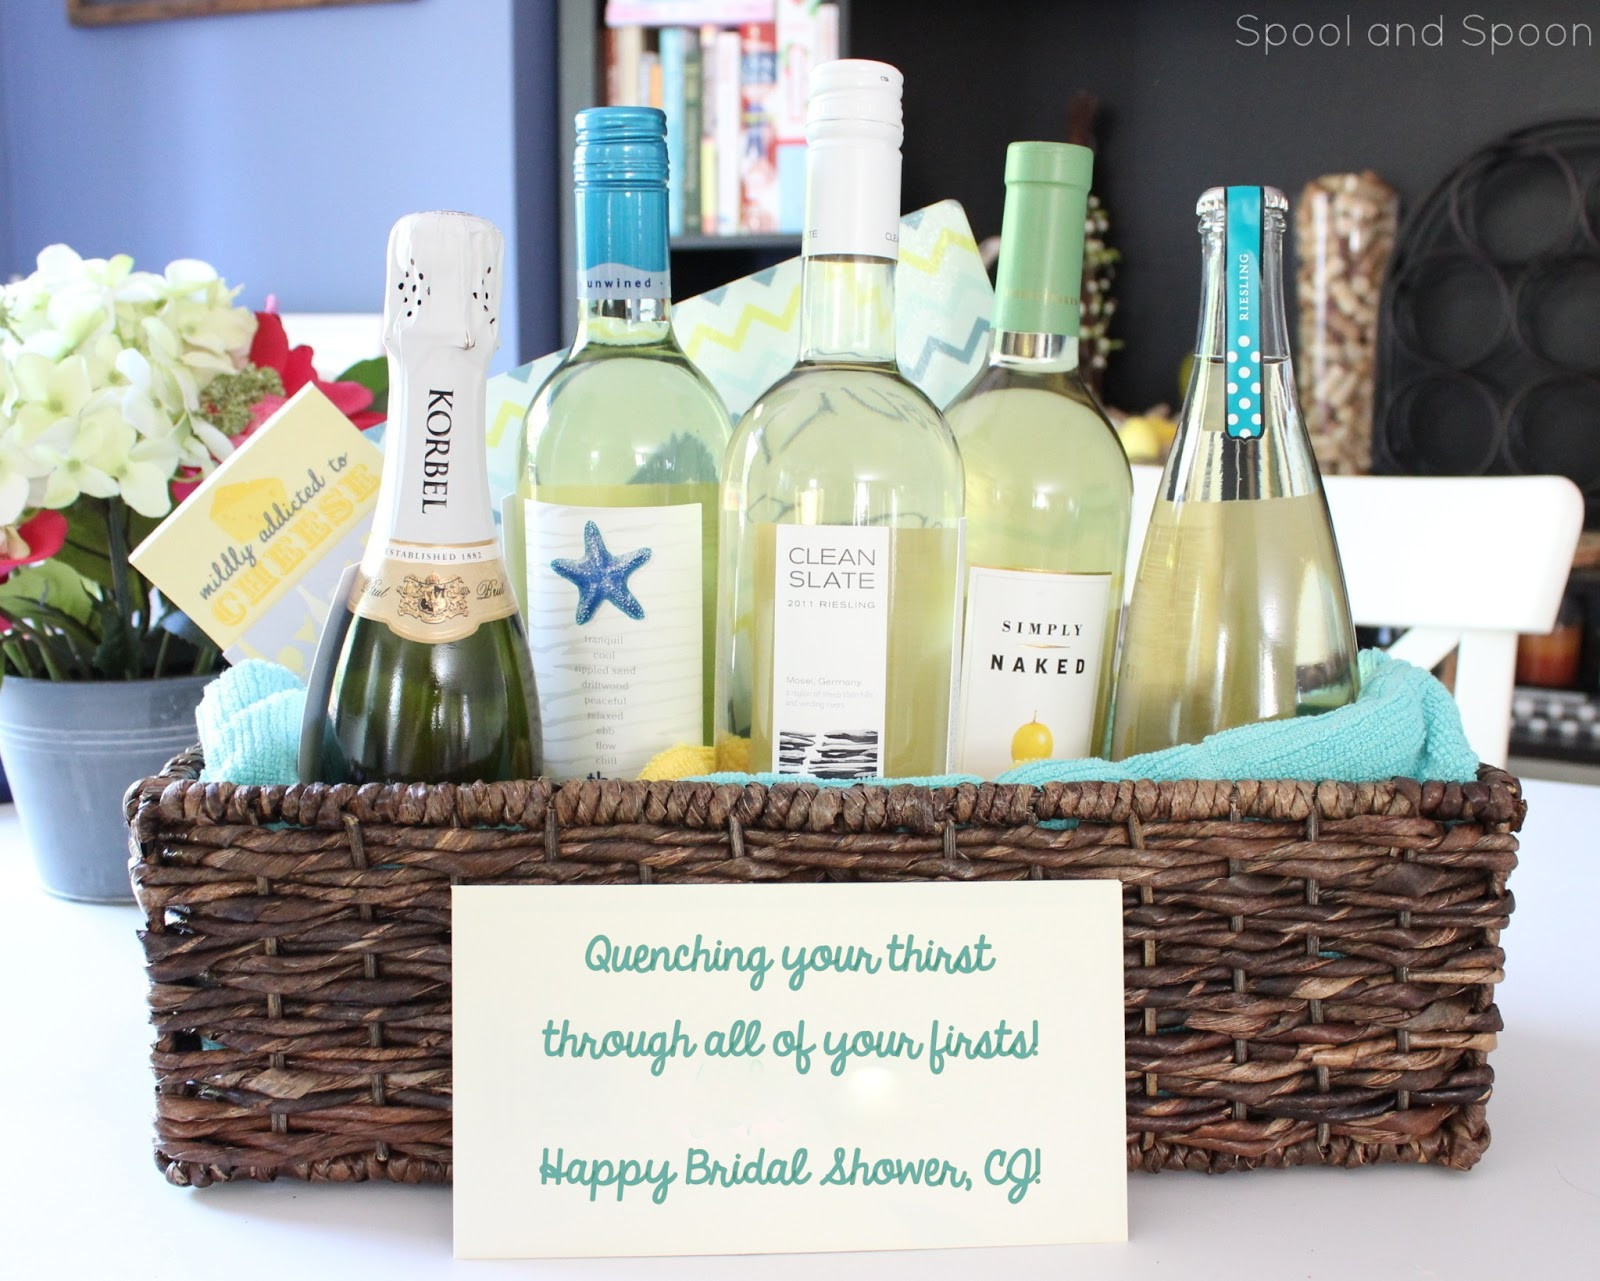 Wedding Wine Gift
 Spool and Spoon "All of Your Firsts" Wine Gift Basket